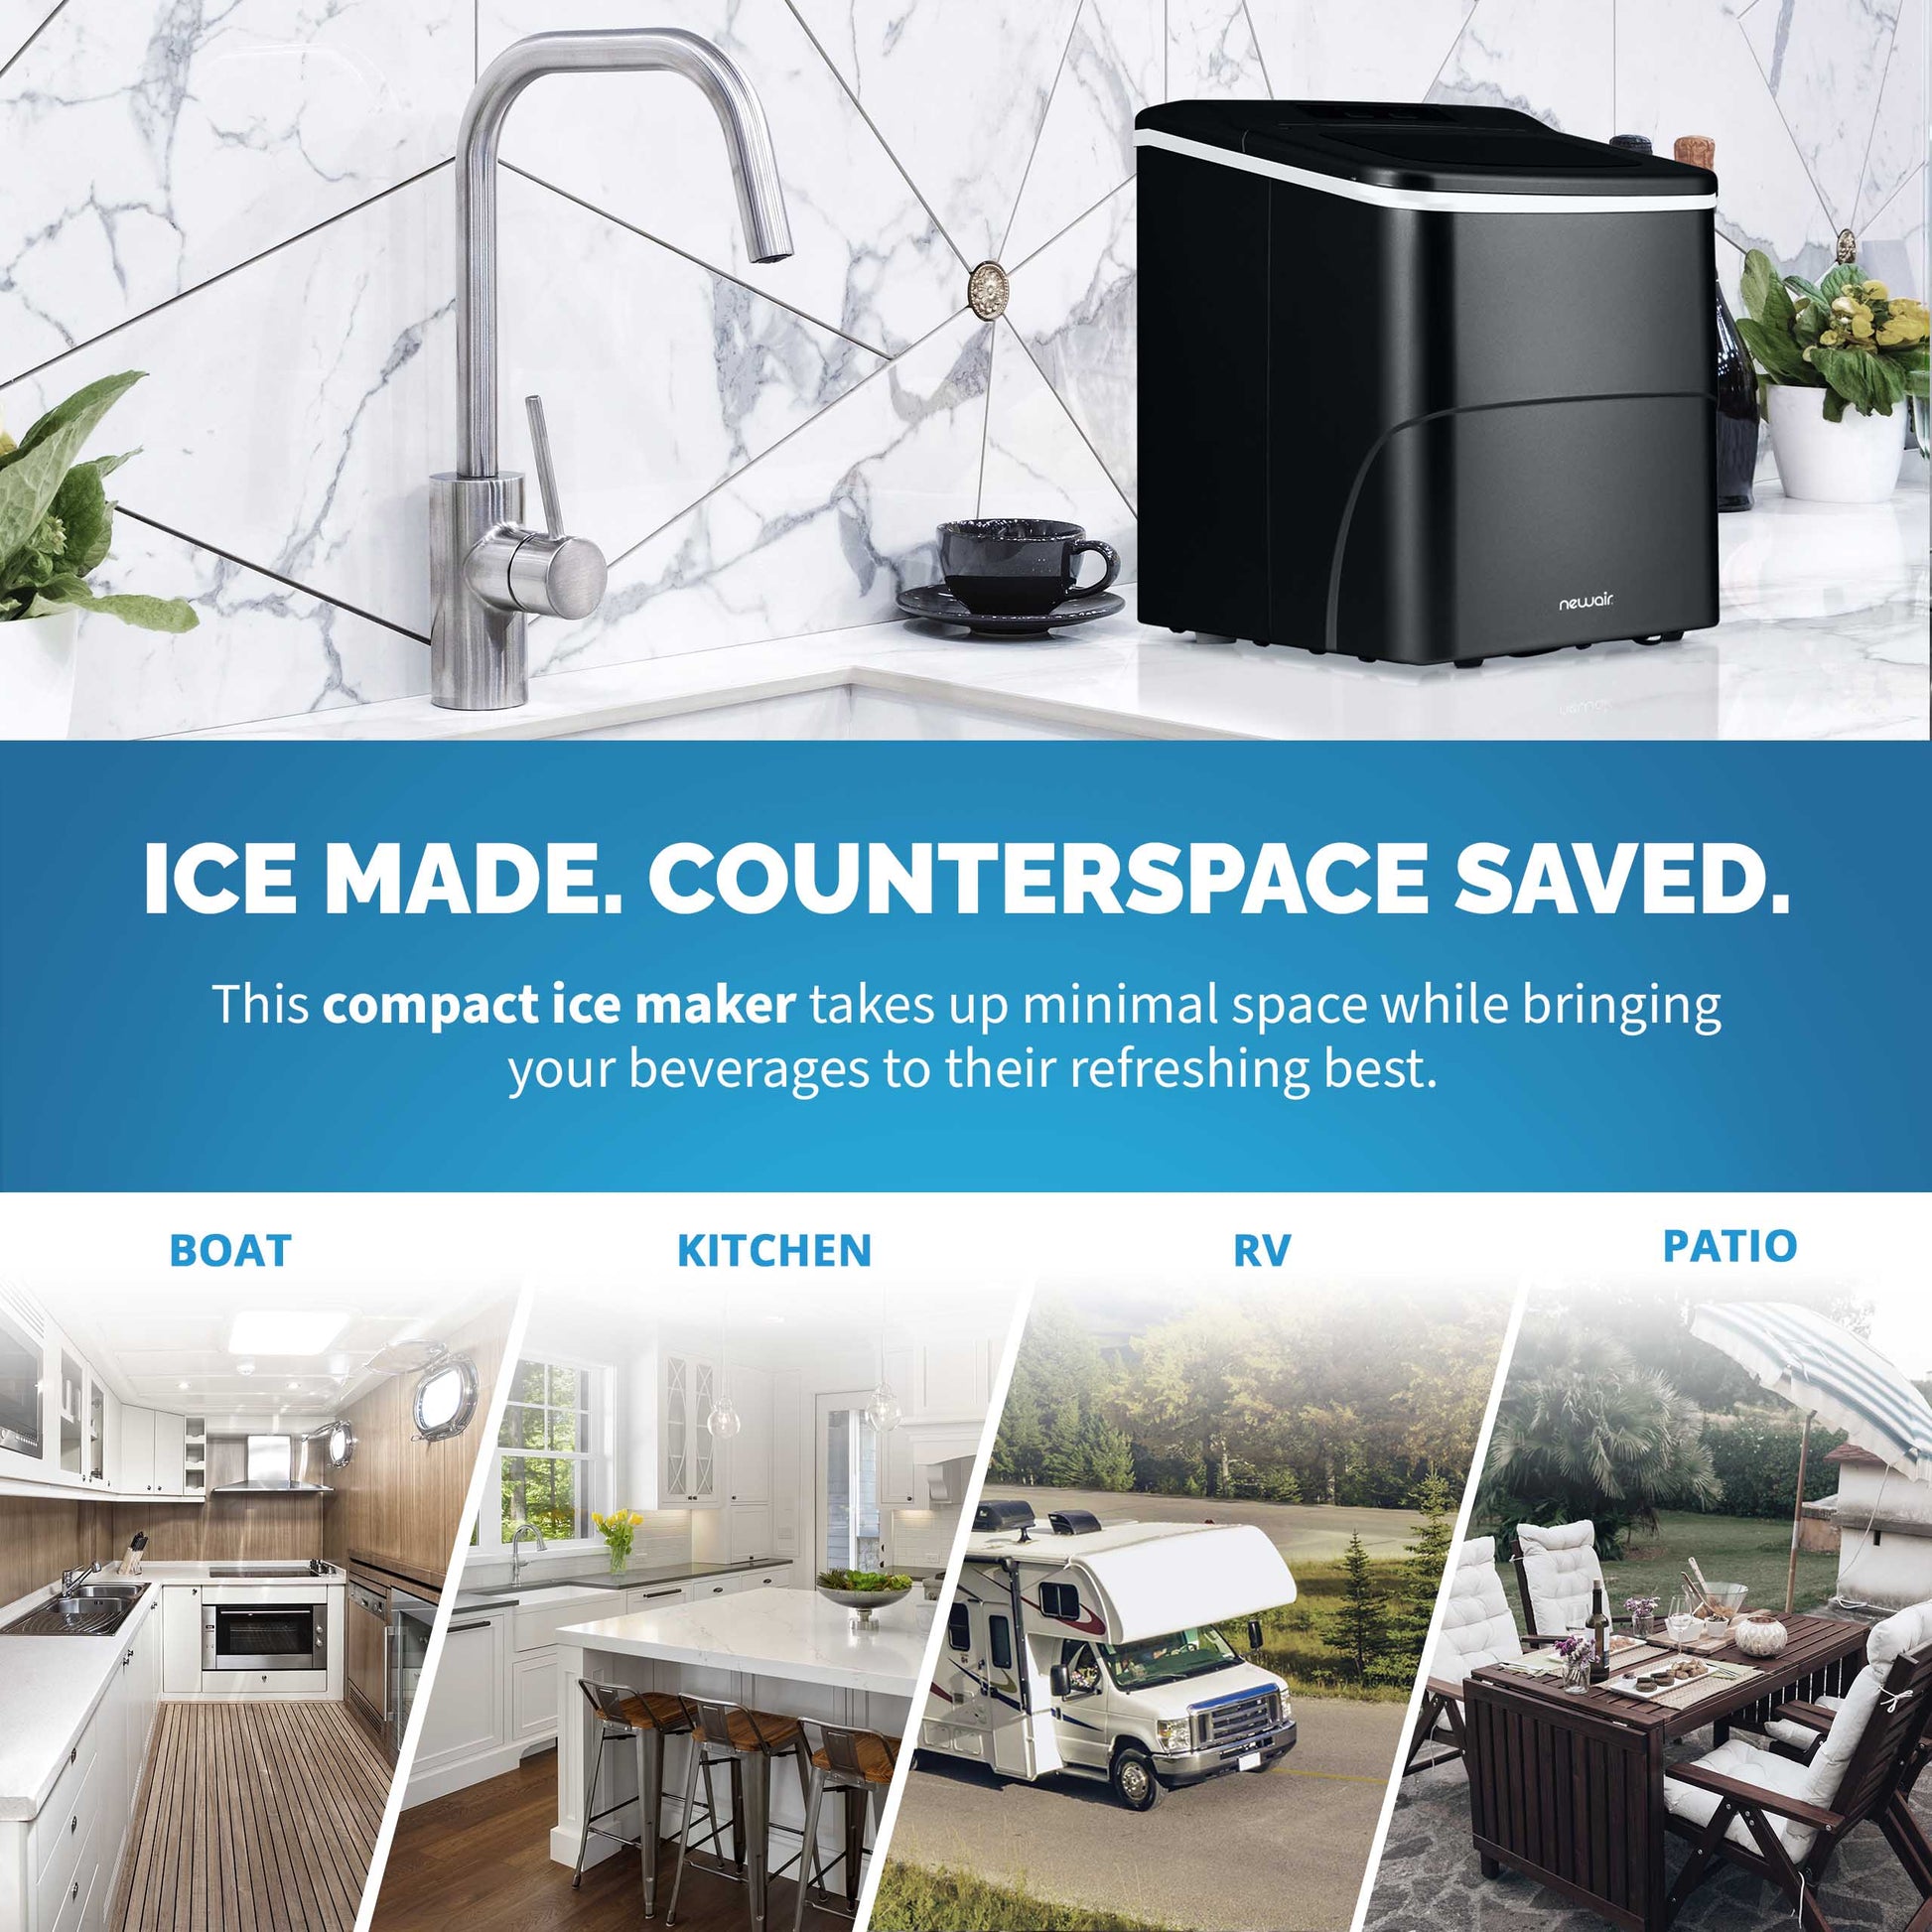 Newair 26 lbs. Countertop Ice Maker, Matte Black Portable and Lightweight, Intuitive Control, Large or Small Ice Size, Easy to Clean BPA-Free Parts, Perfect for Cocktails, Scotch, Soda and More